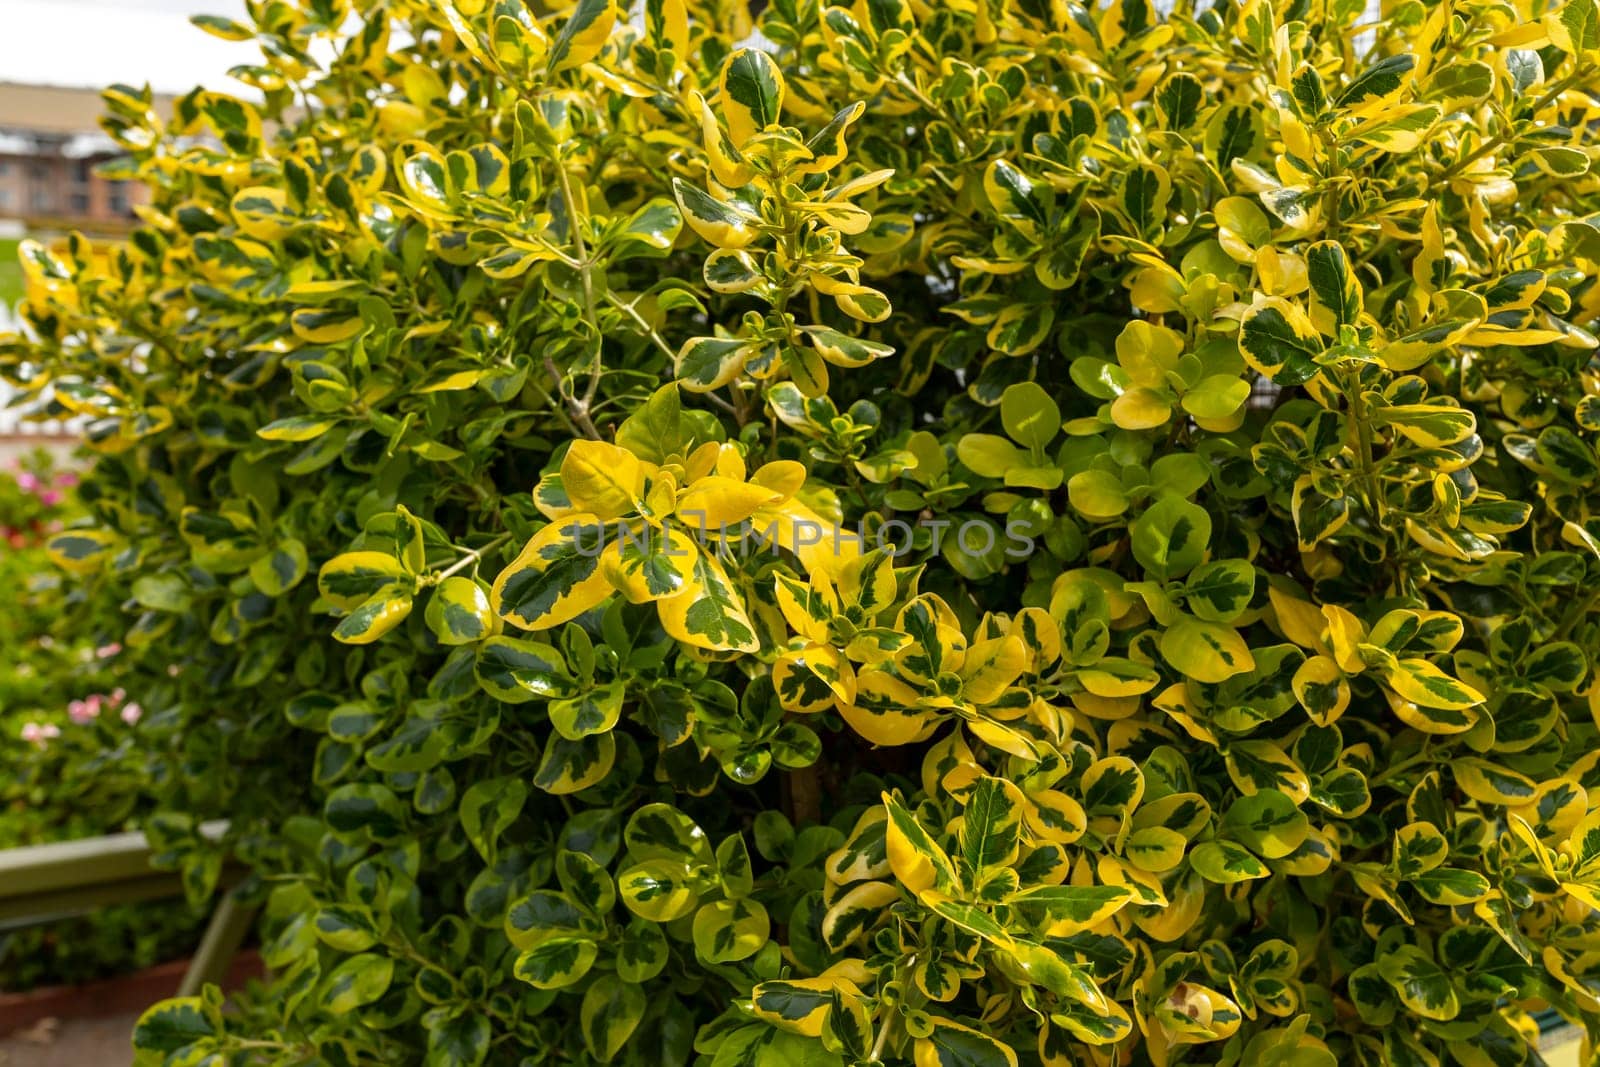 Closeup Evergreen Shrub Golden Euonymus With Green, Gold Variegated Foliage in Outdoors on Backyard. Evonymo Plant, Small Spindle Tree. Horizontal. Floriculture, Greenhouse.